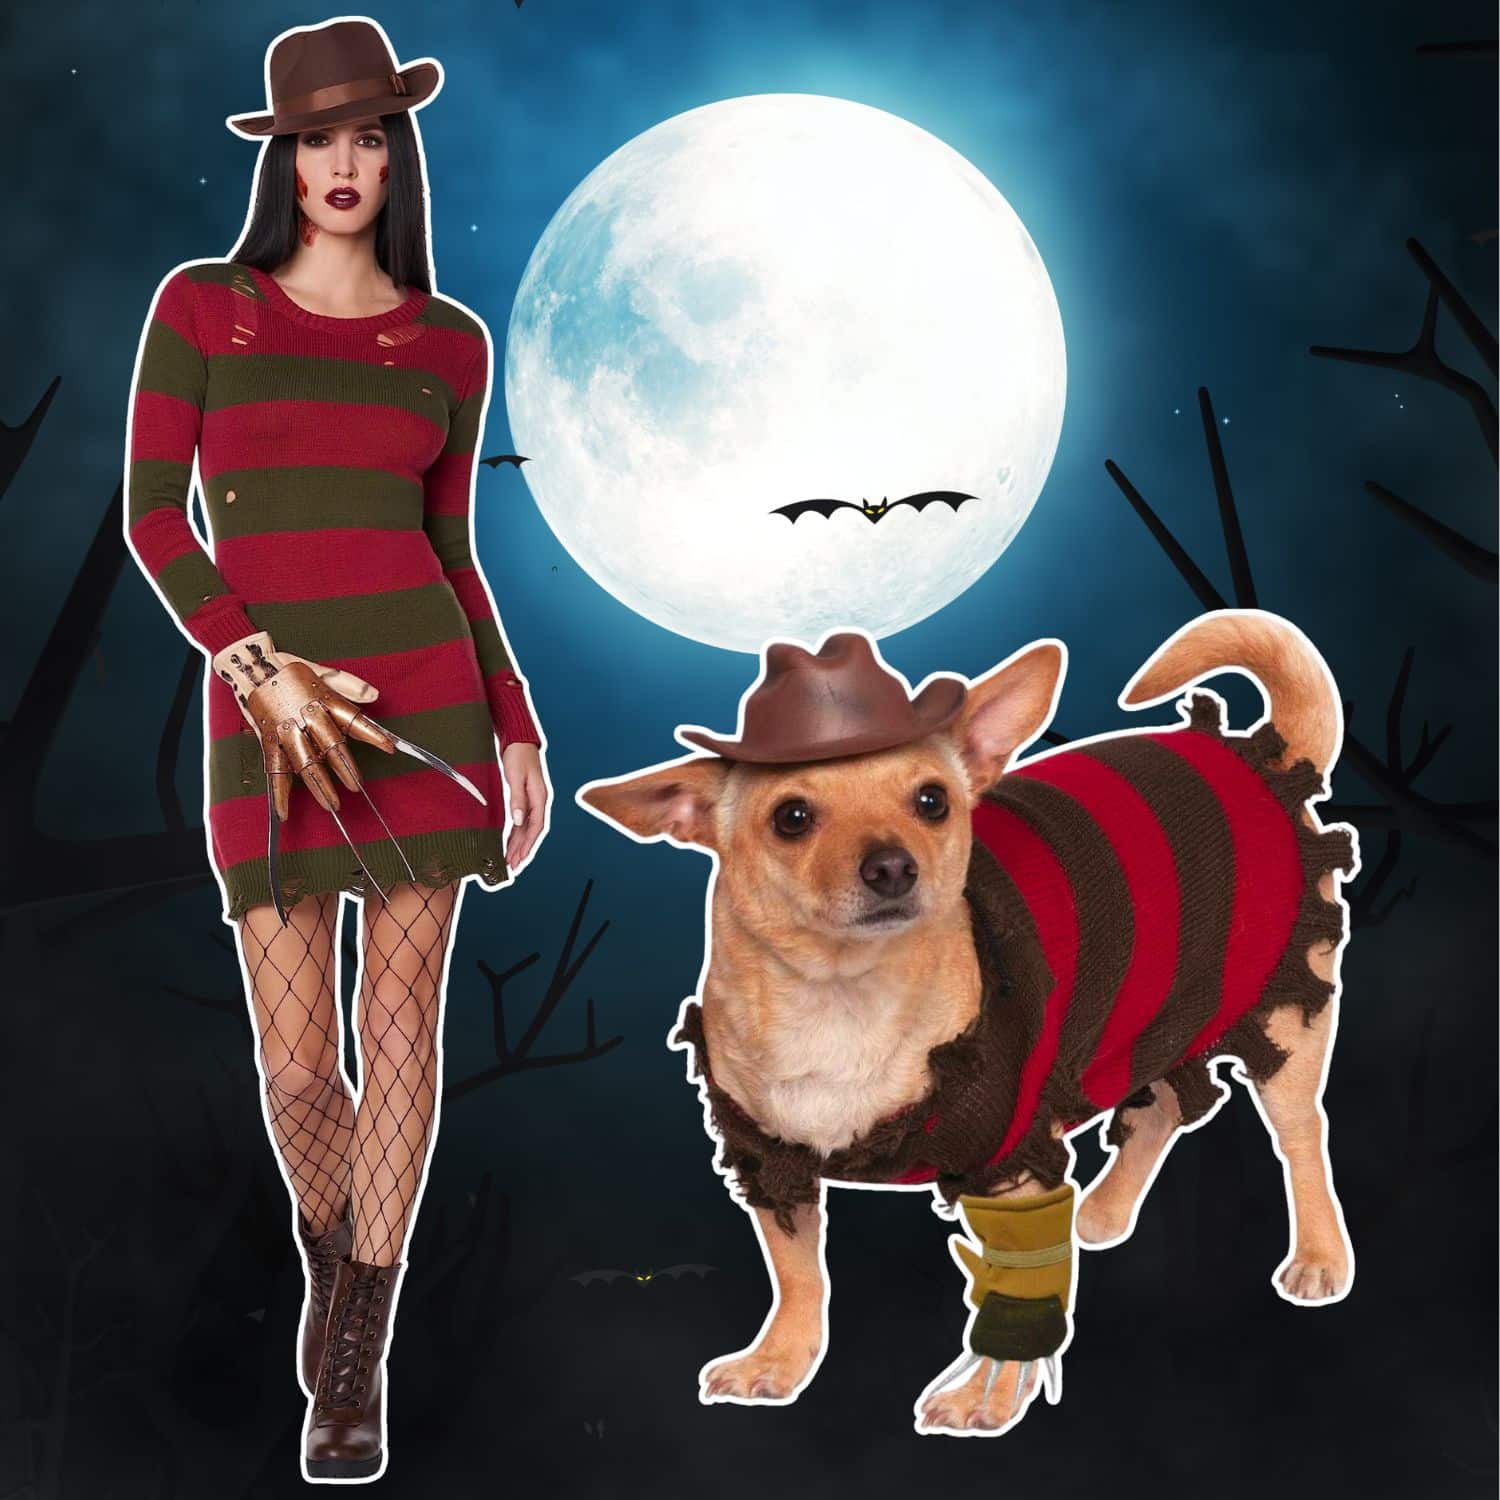 Dog and owner halloween costumes Freddy Krueger - dog Christmas ornaments | PawCool ™